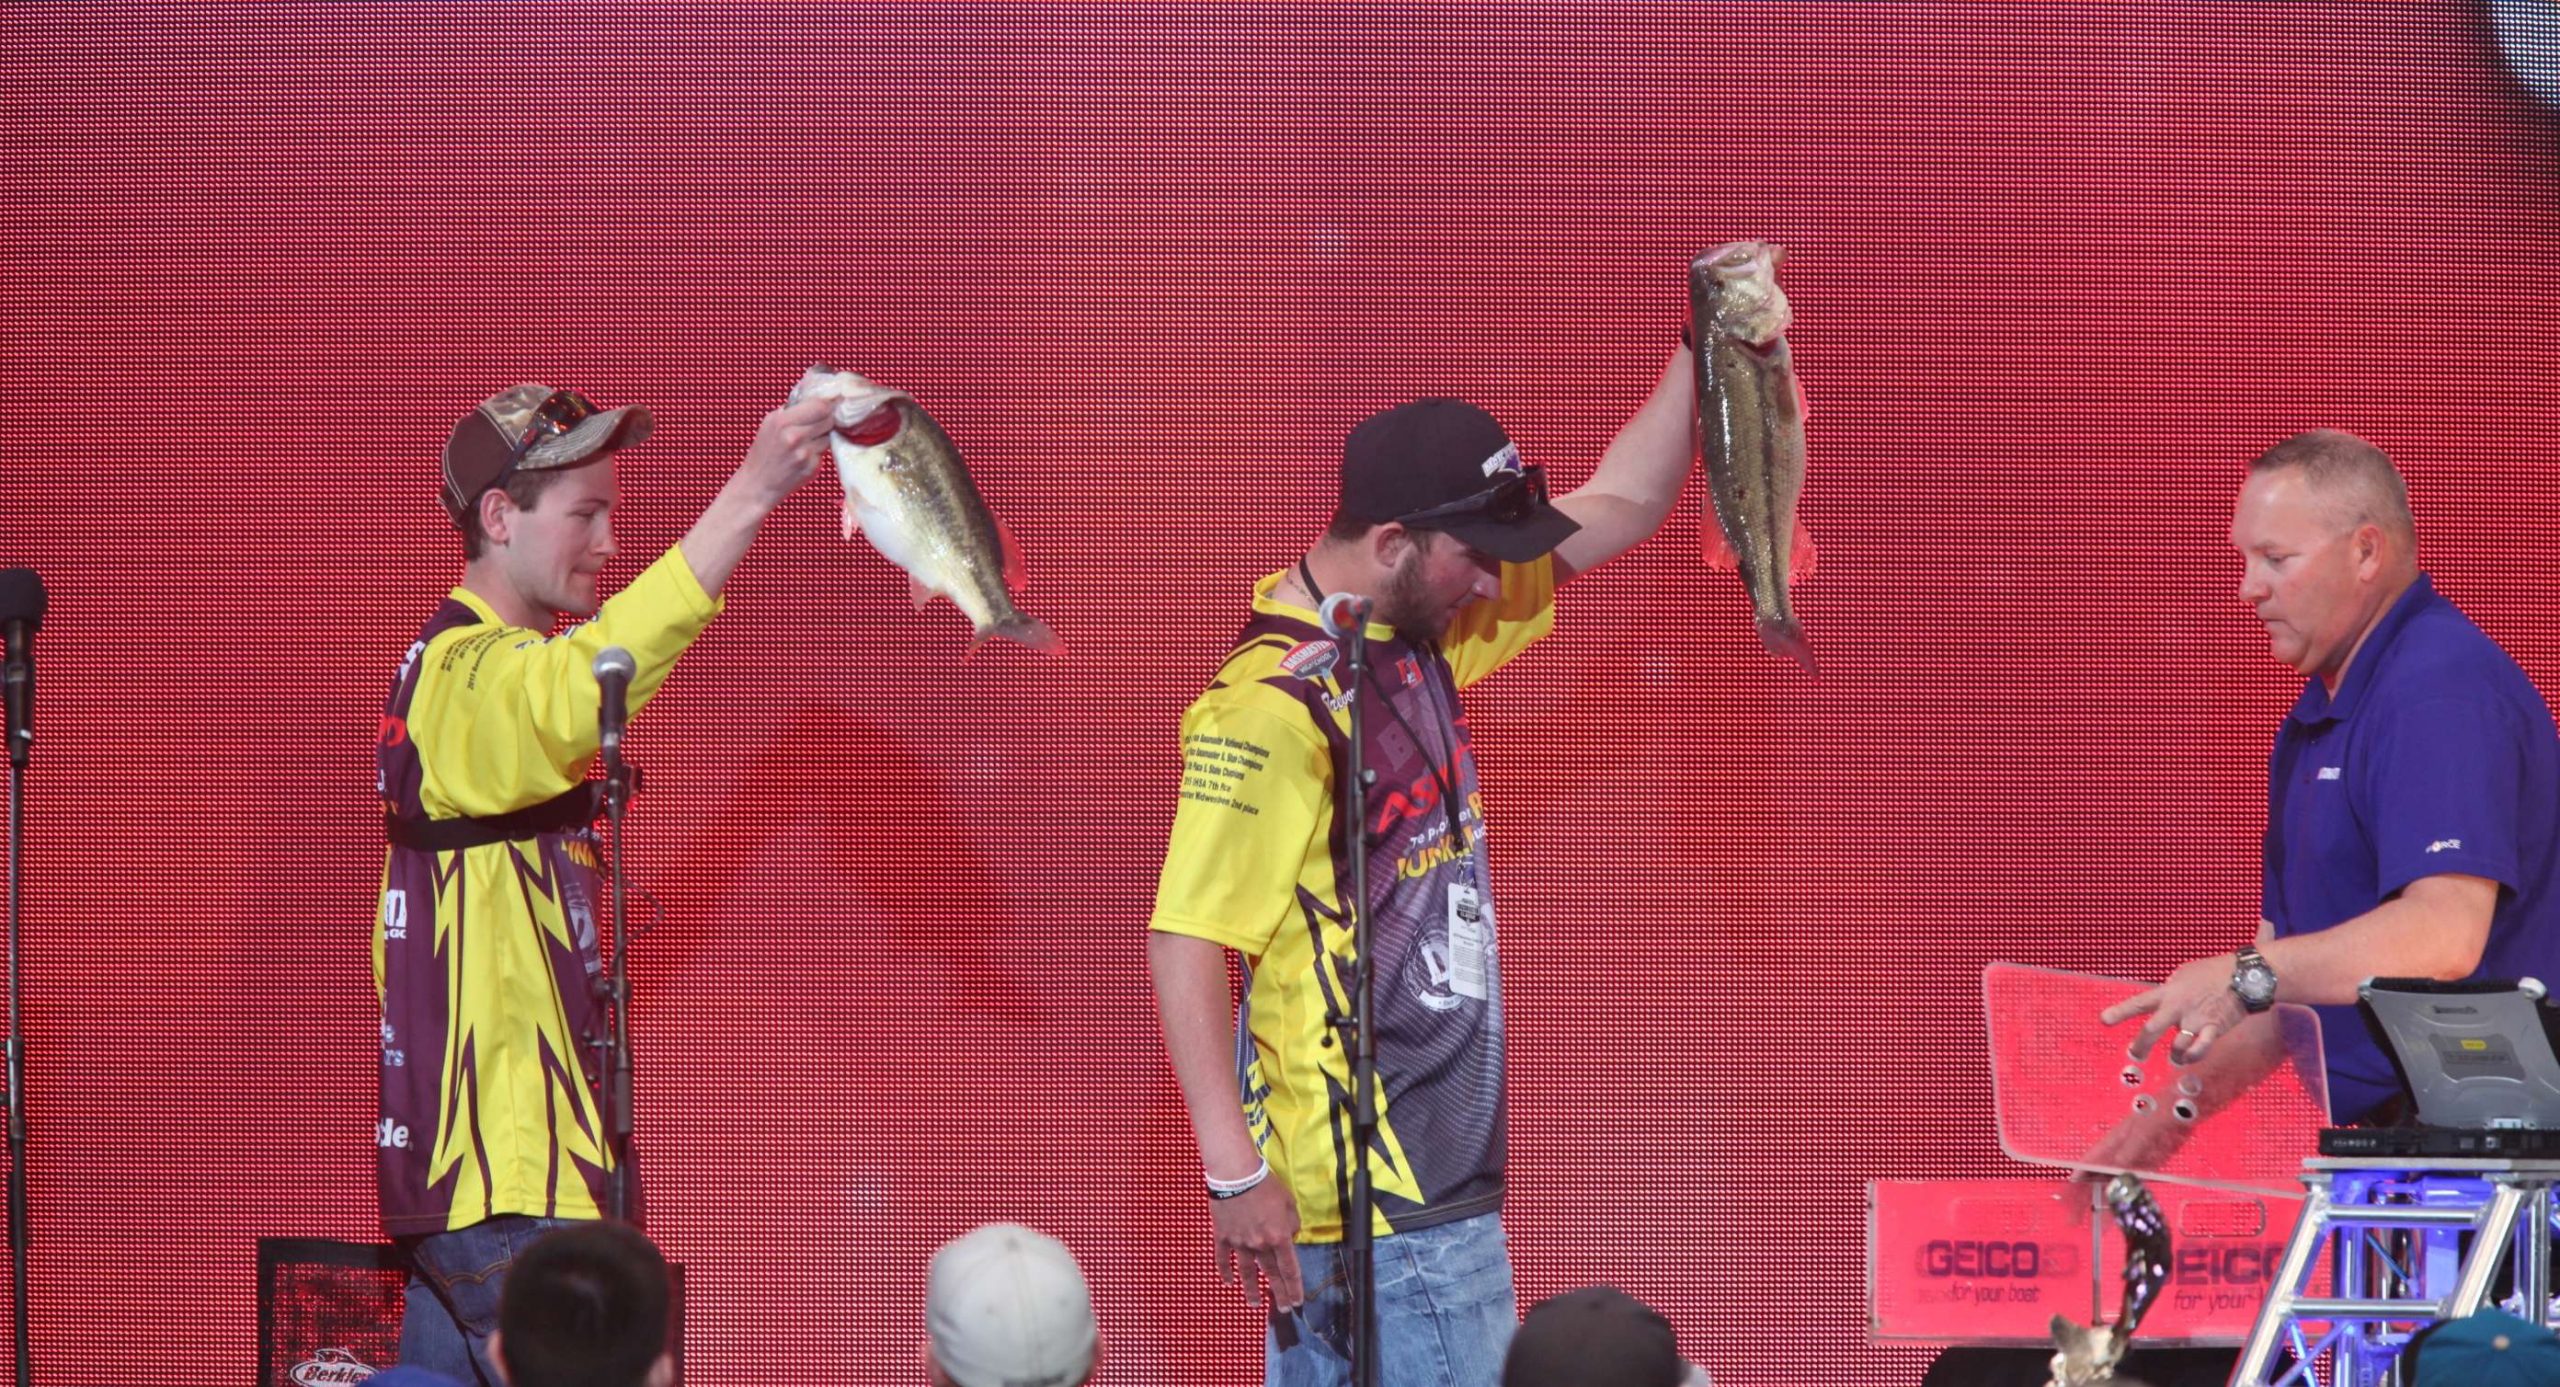 The Benton High School anglers hit the stage with two on display.